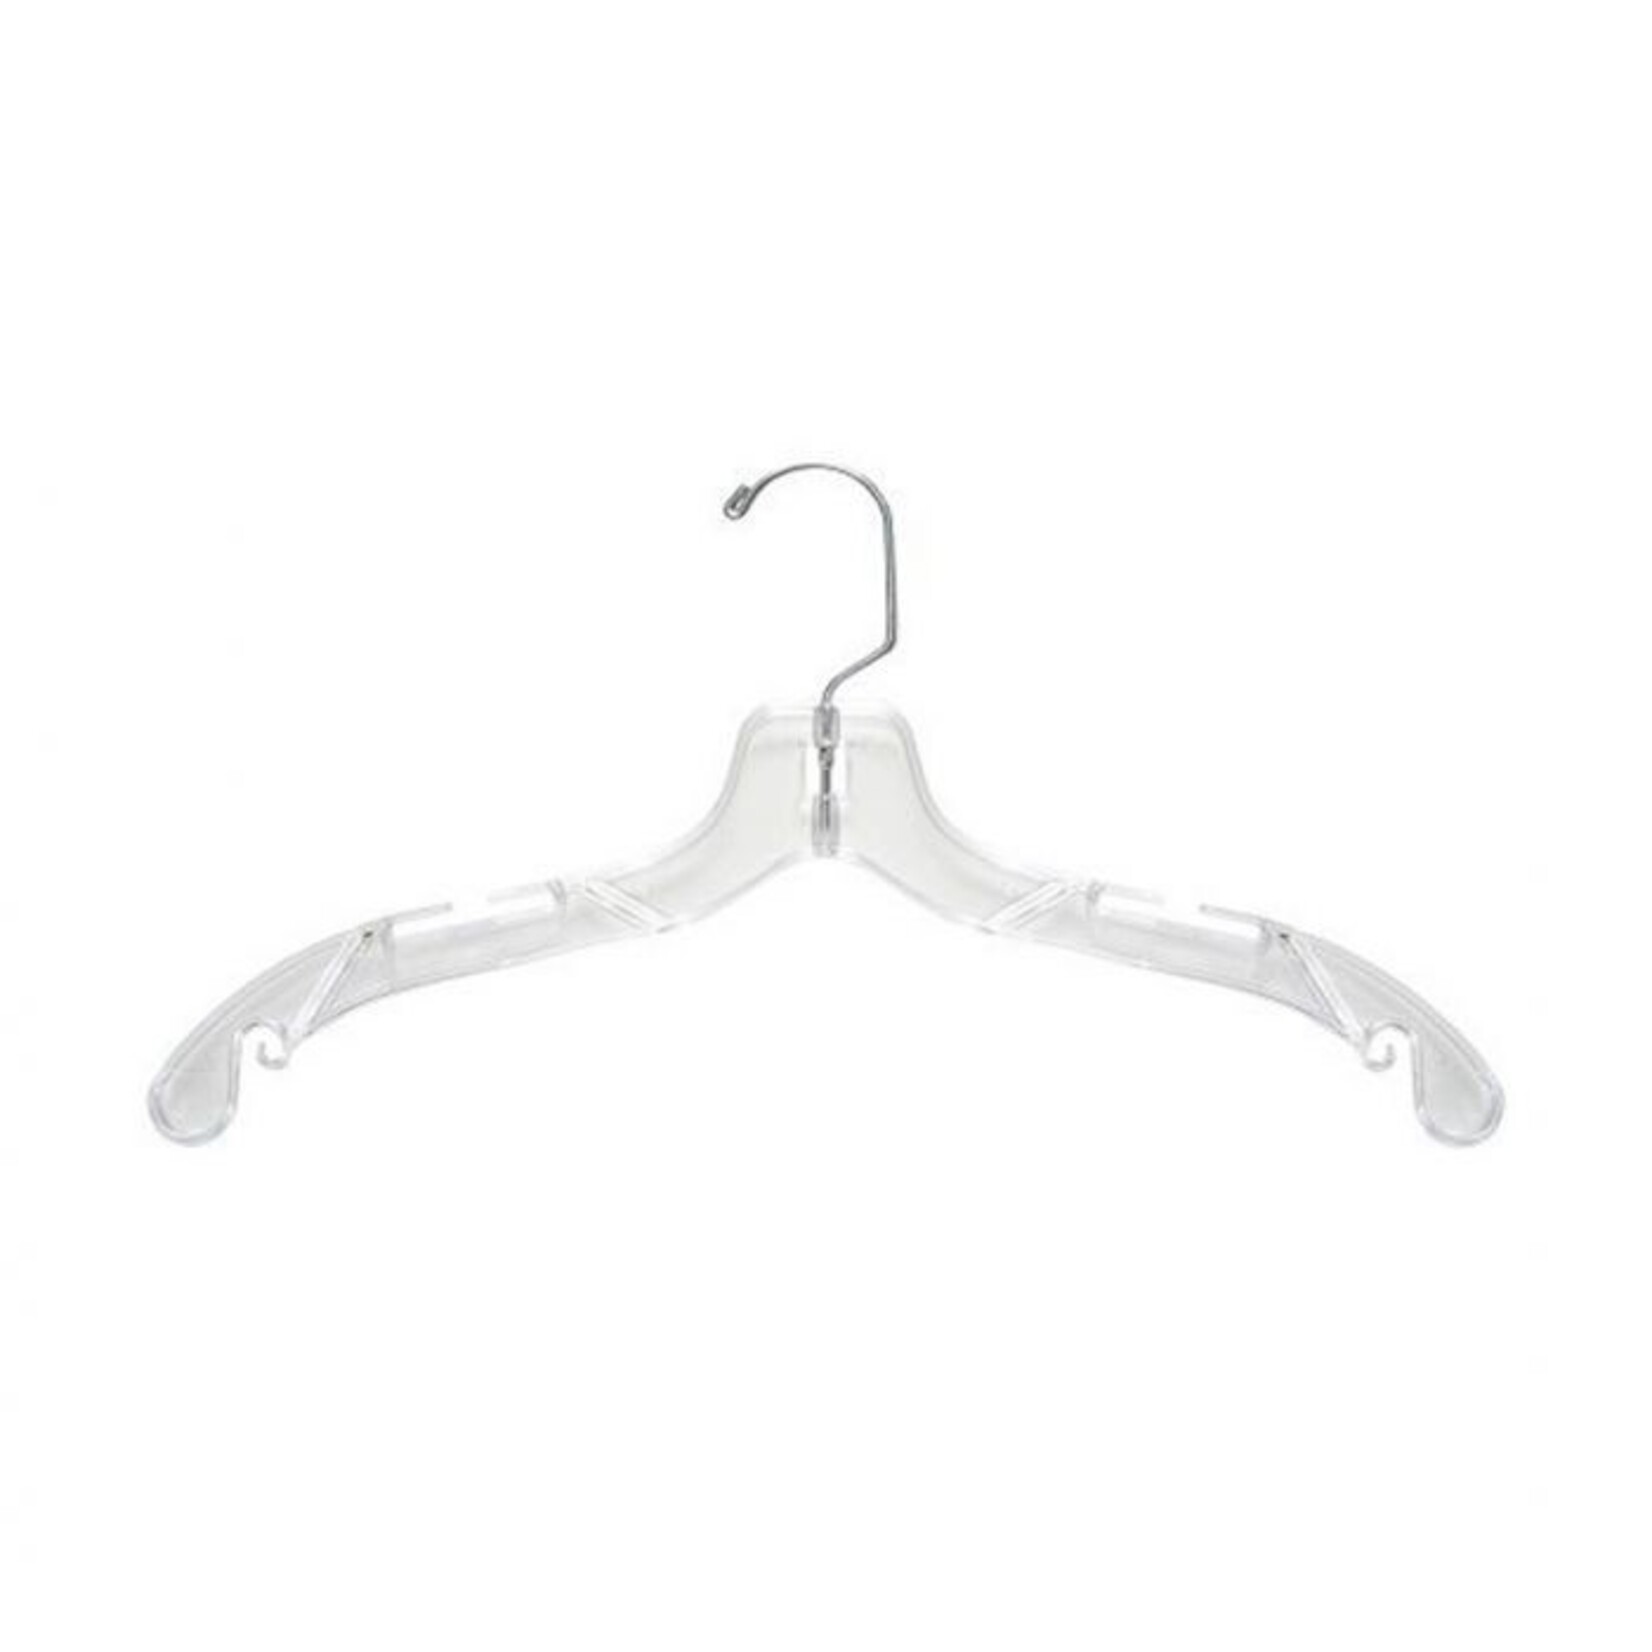 MICA Store Clothing Hanger set of 10 clear